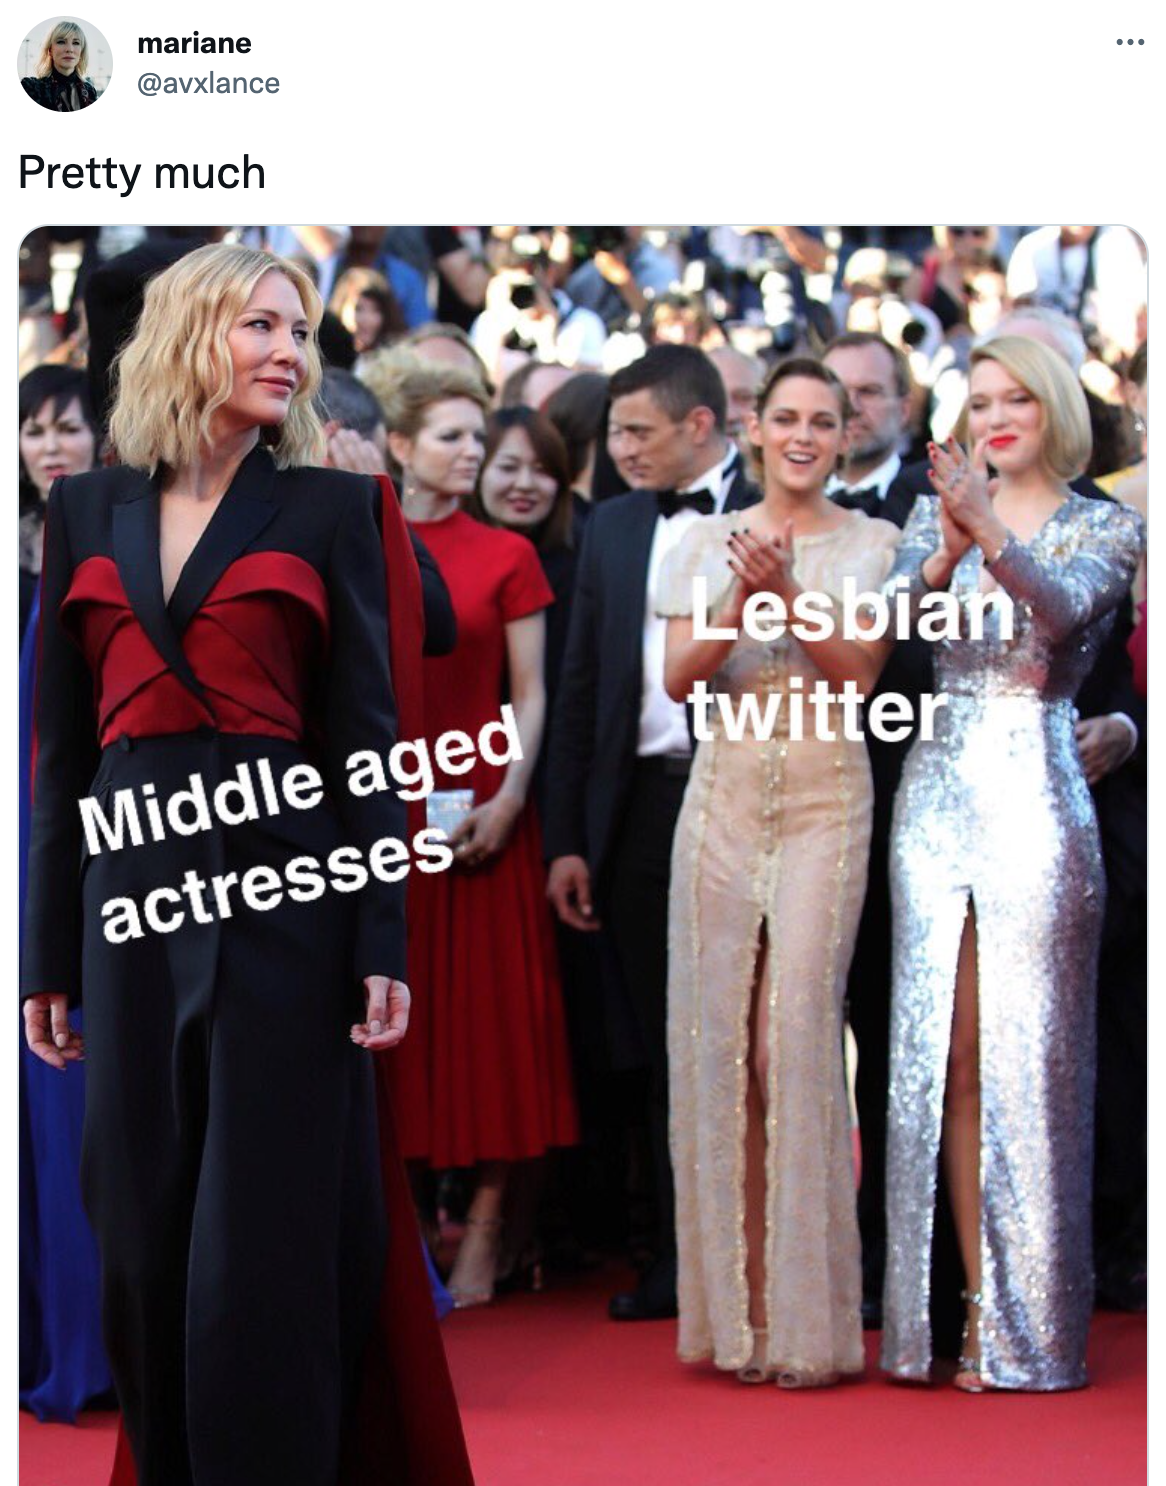 Lesbians for Middle-Aged Actresses